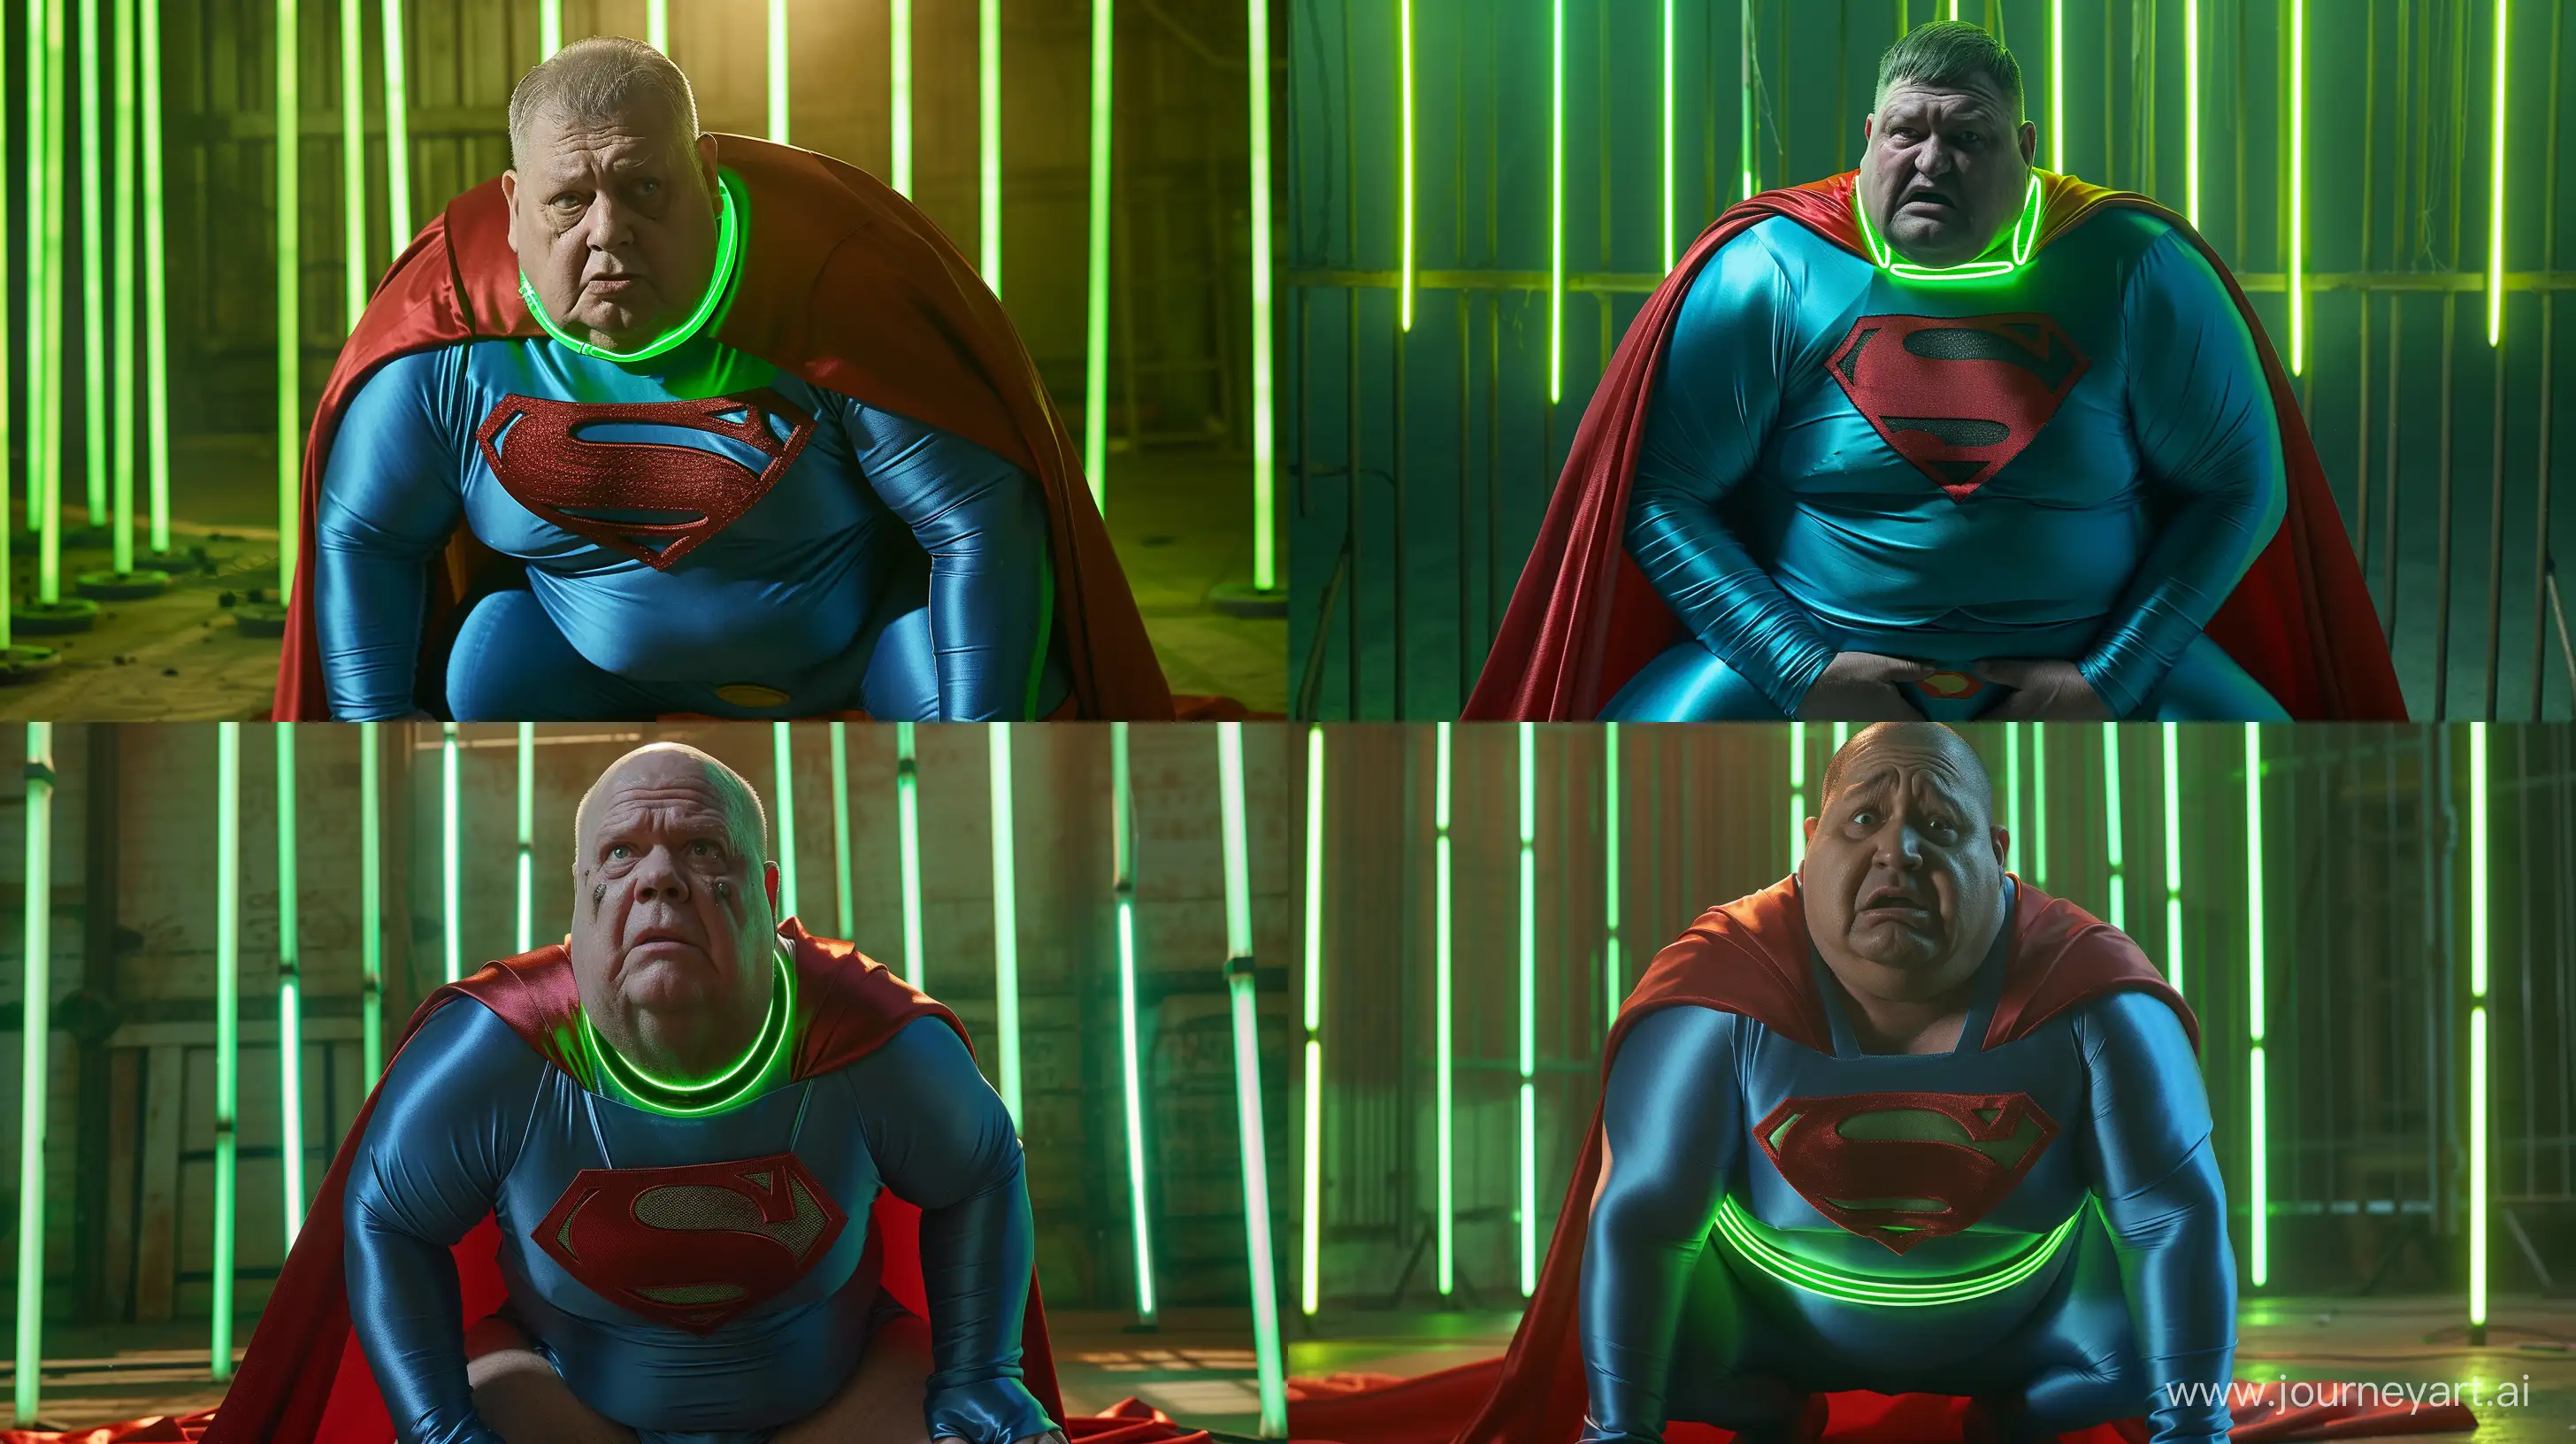 Concerned-Elderly-Man-in-Vibrant-Superman-Costume-against-Glowing-Neon-Bars